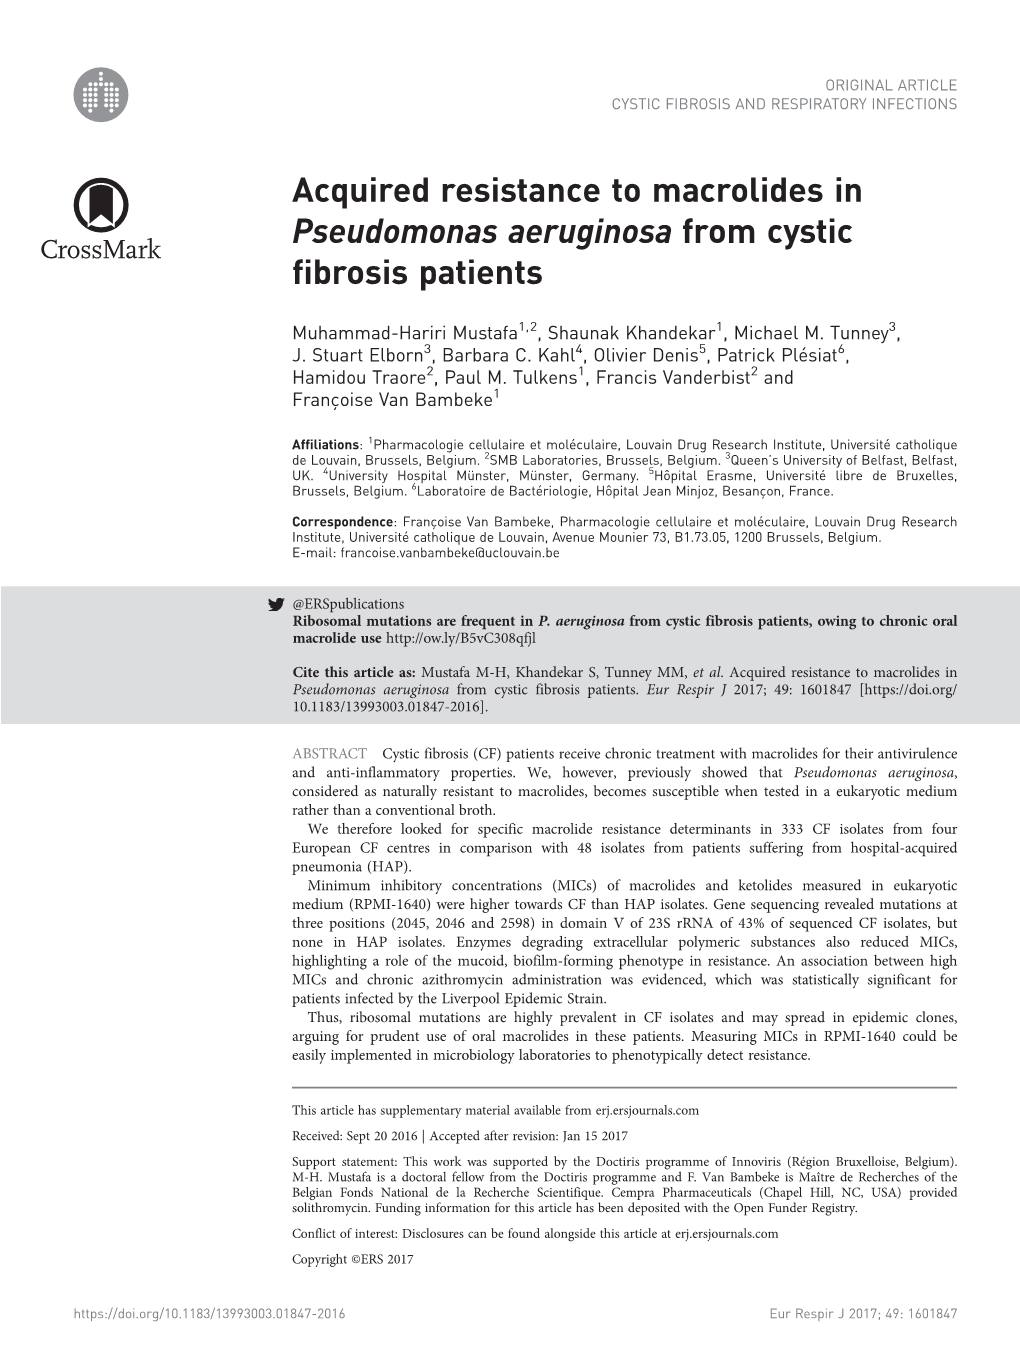 Acquired Resistance to Macrolides in Pseudomonas Aeruginosa from Cystic Fibrosis Patients